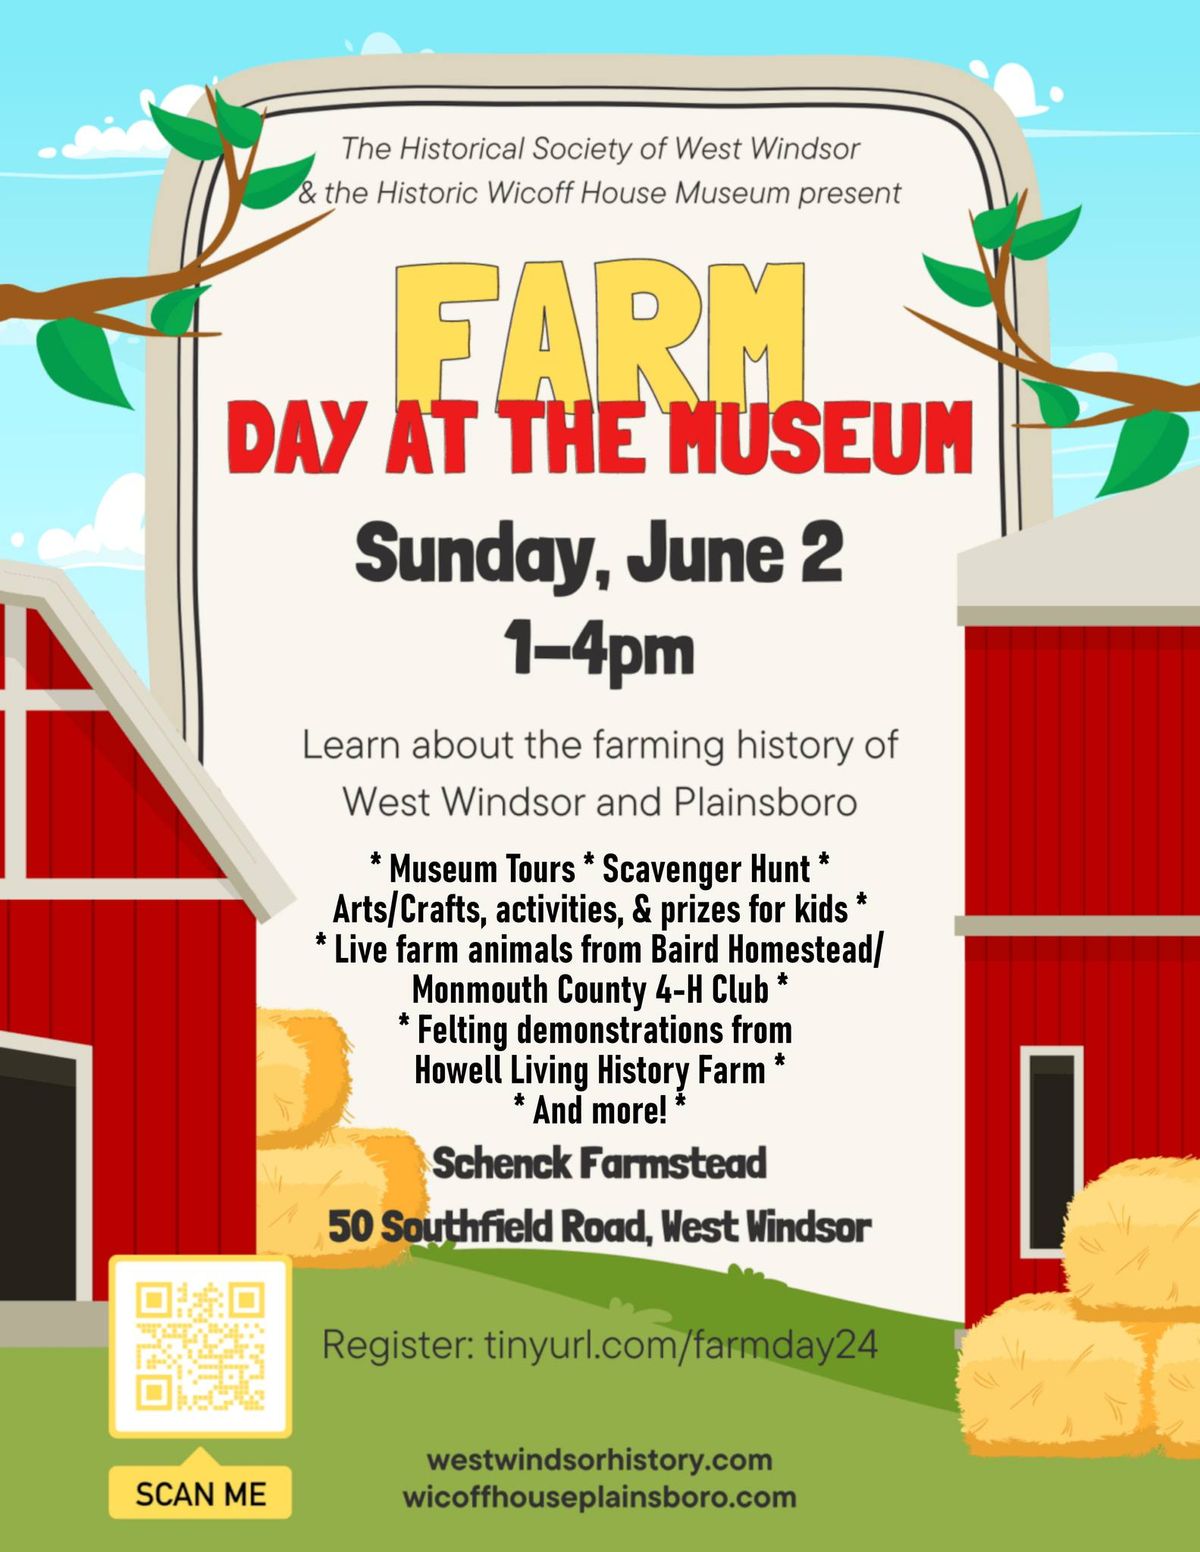 "Farm Day at the Museum" by the Historical Society of West Windsor & the Wicoff House Museum